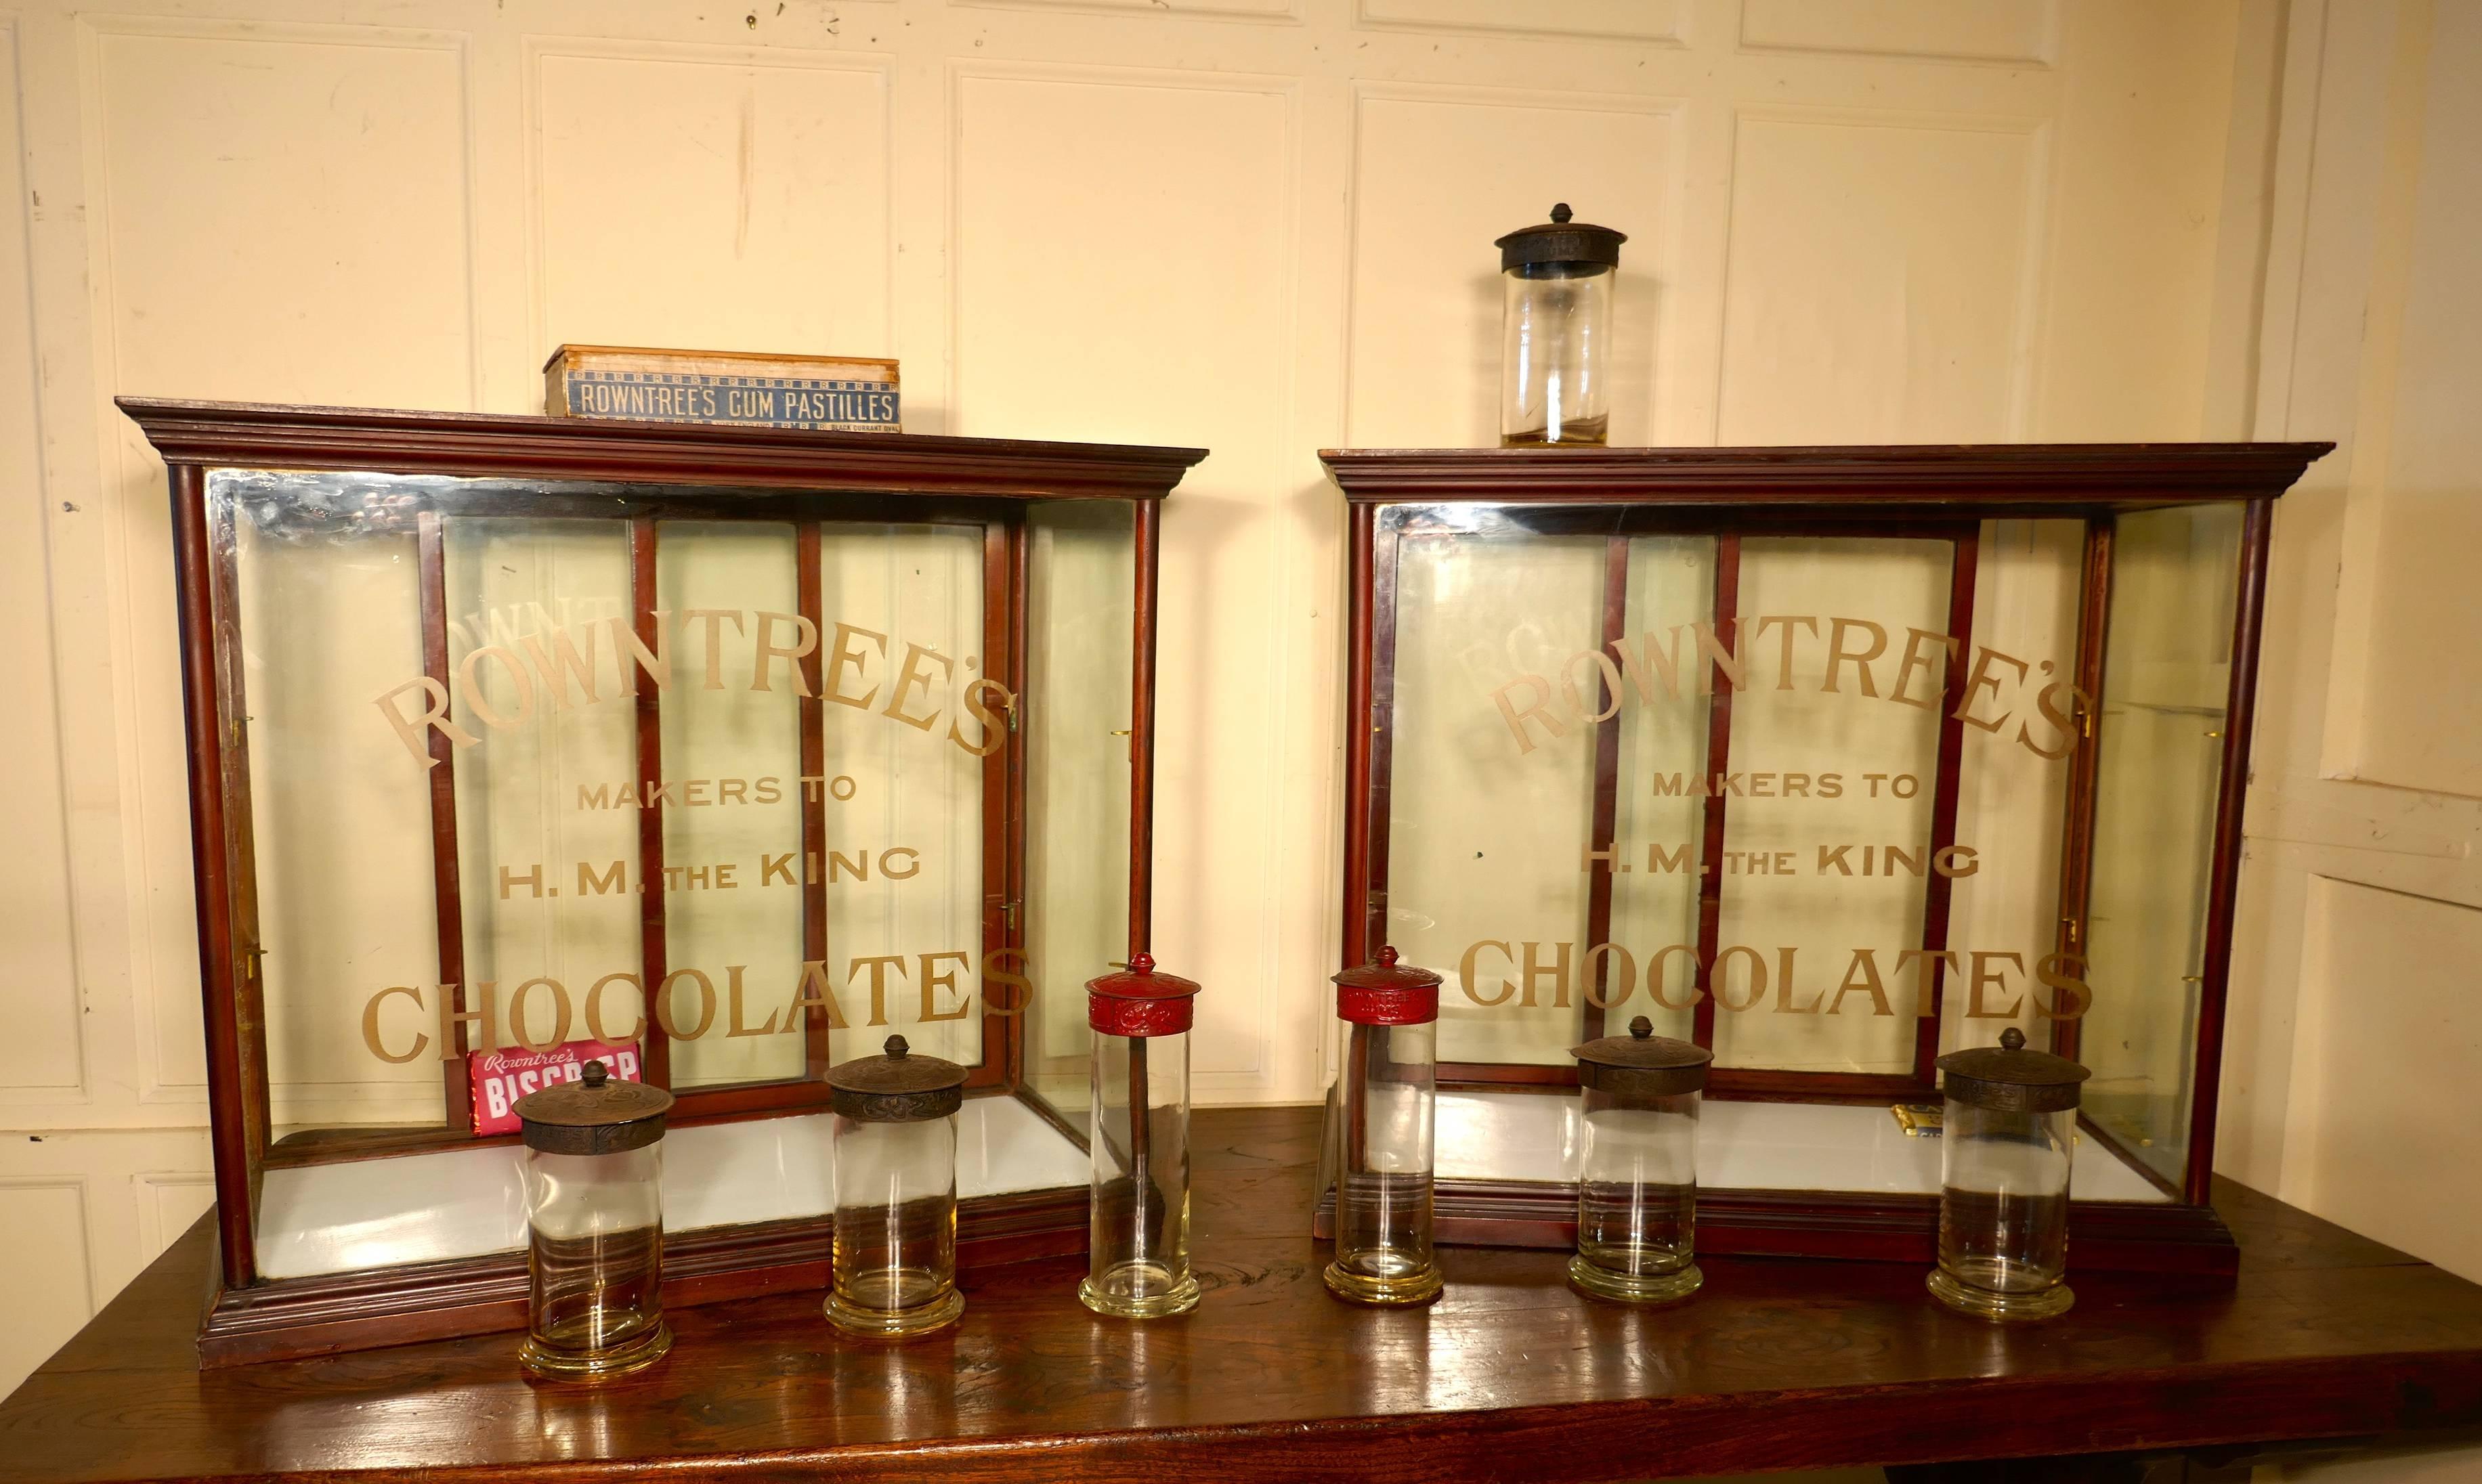 A Pair Sweet Shop Display Cabinets, Rowntree’s Chocolates

This is a pair of glazed advertising Shop Display Cabinets they are made mahogany, the lettering on the front of the cabinets is etched into the glass 
The words are 
ROWNTREE’S 
MAKERS TO